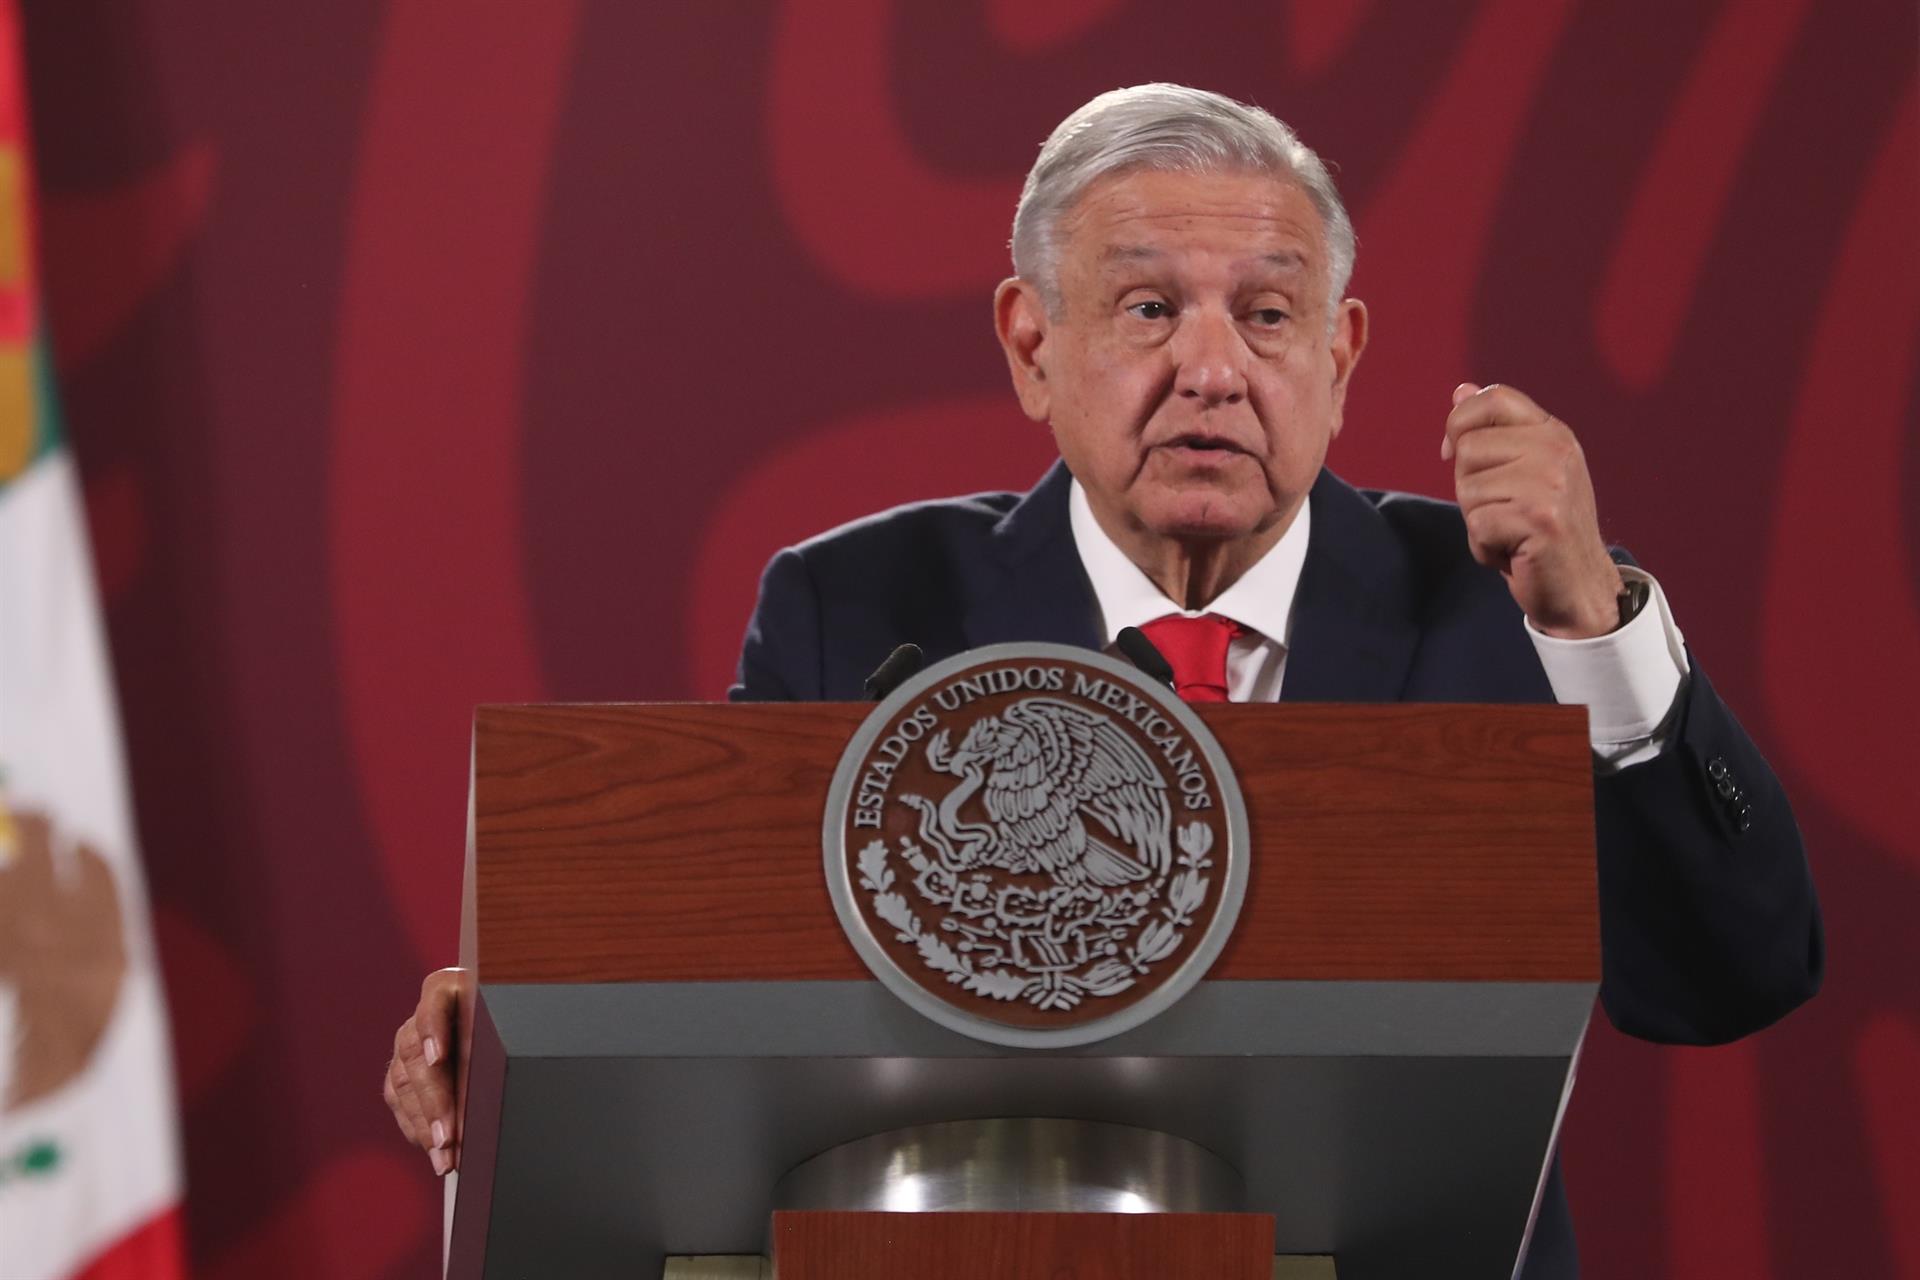 AMLO on whether Cuba, Venezuela and Nicaragua will be invited to the Summit of the Americas